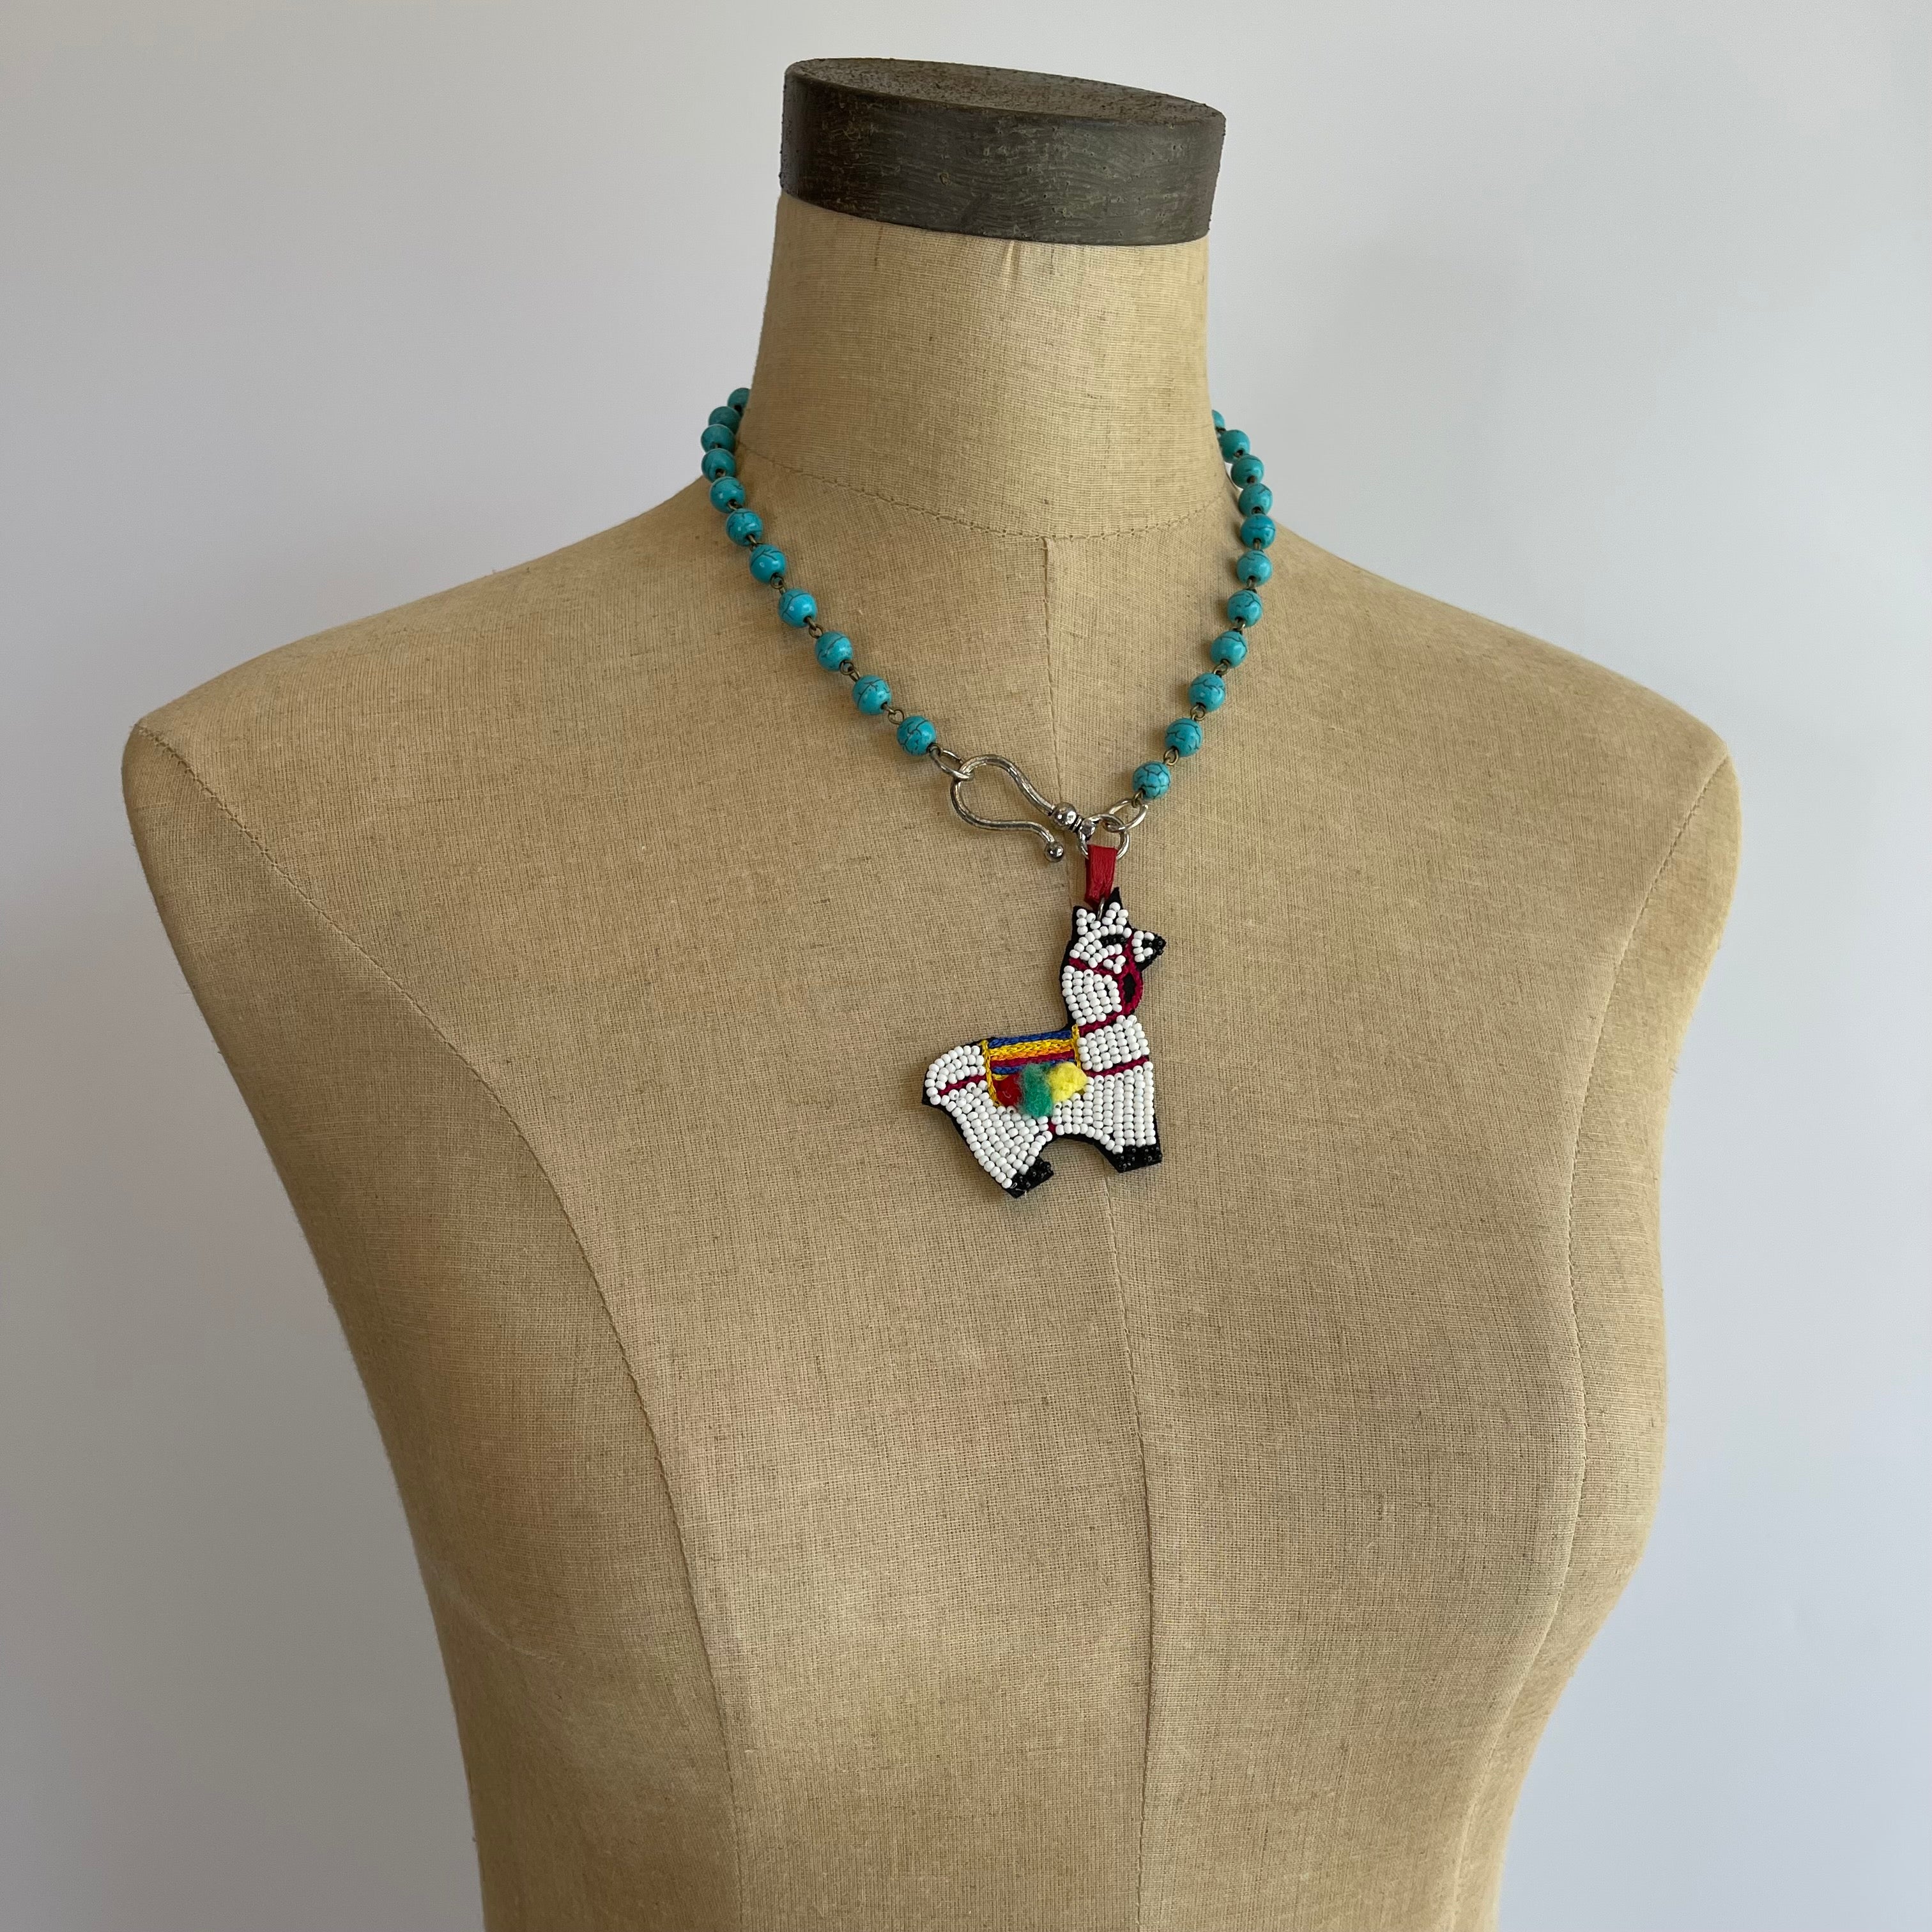 Llama and Turquoise Necklace Bead Work 